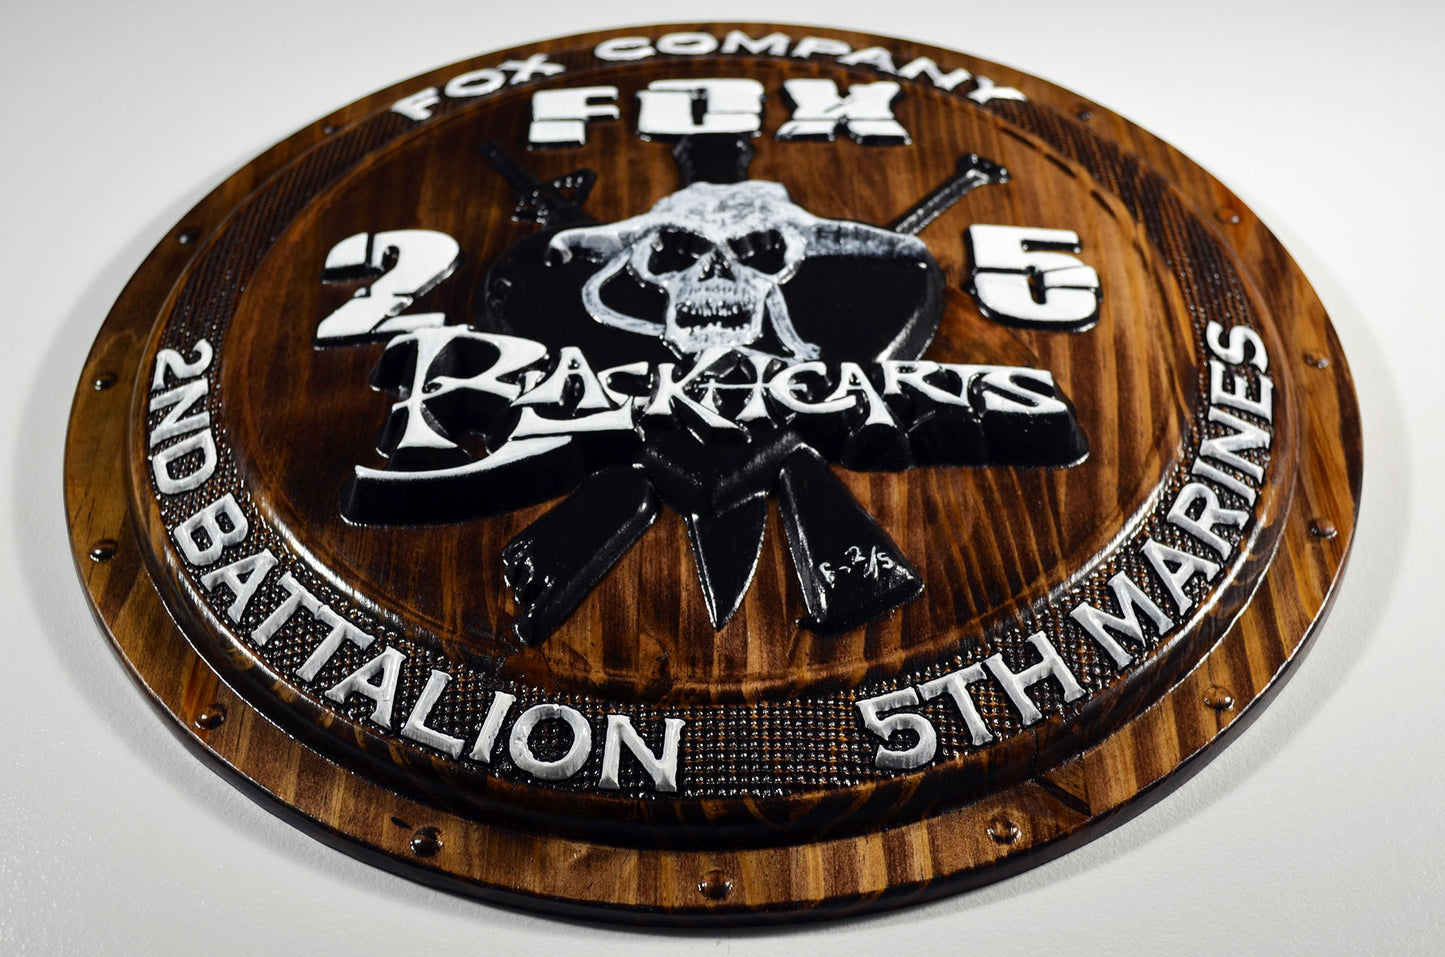 US Marine Corps, Fox Co, 2nd Battalion, 5th Marines, Blackhearts, 3d wood carving, military plaque